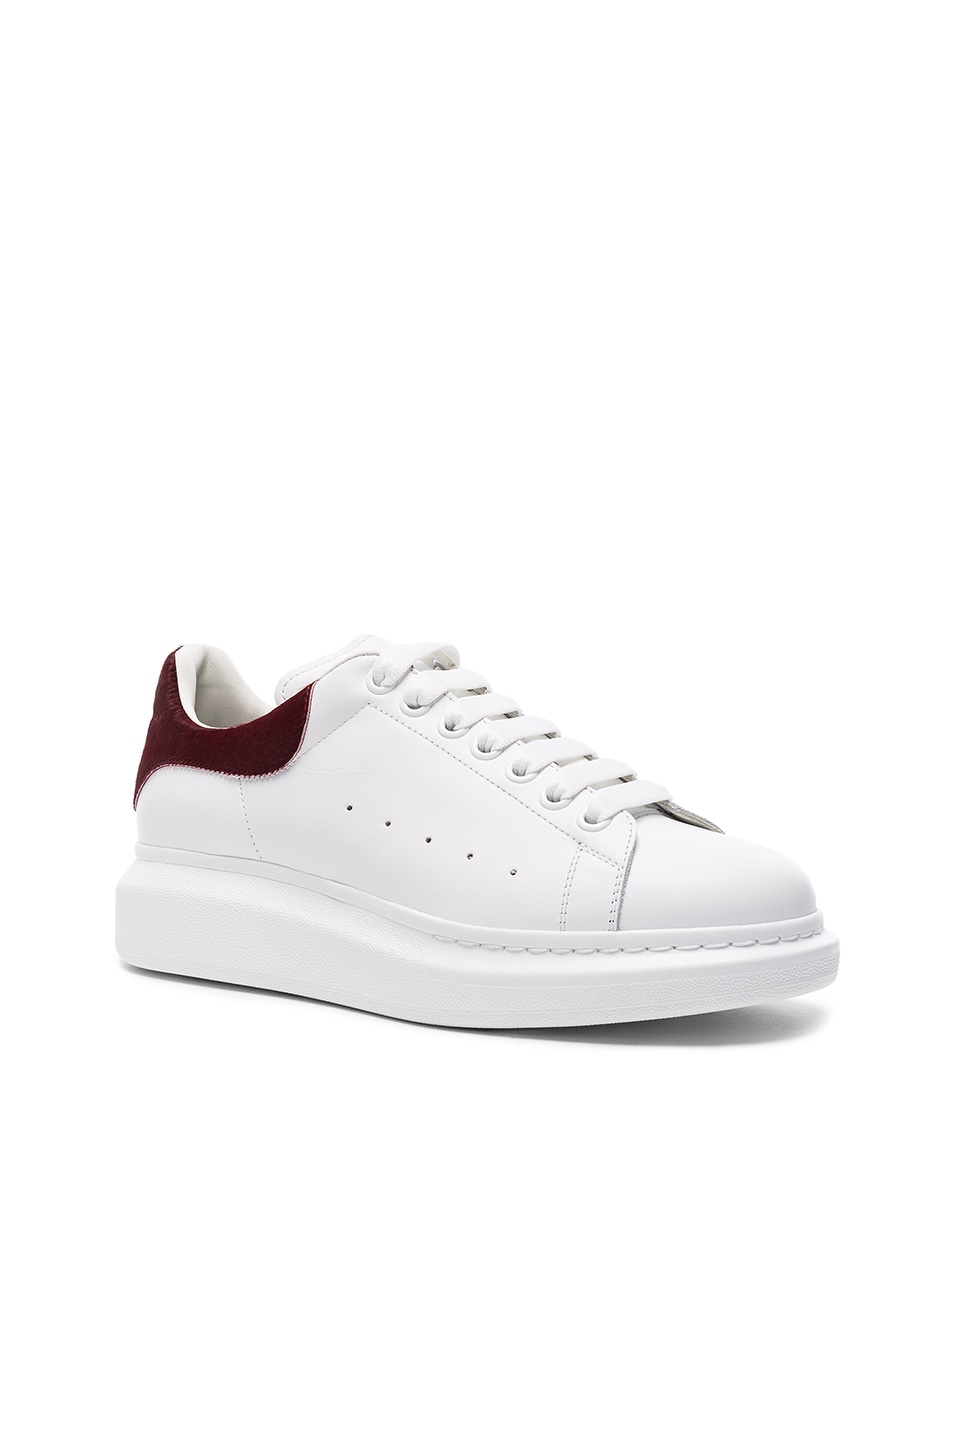 Image 1 of Alexander McQueen Leather Platform Low Top Sneakers in White & Red